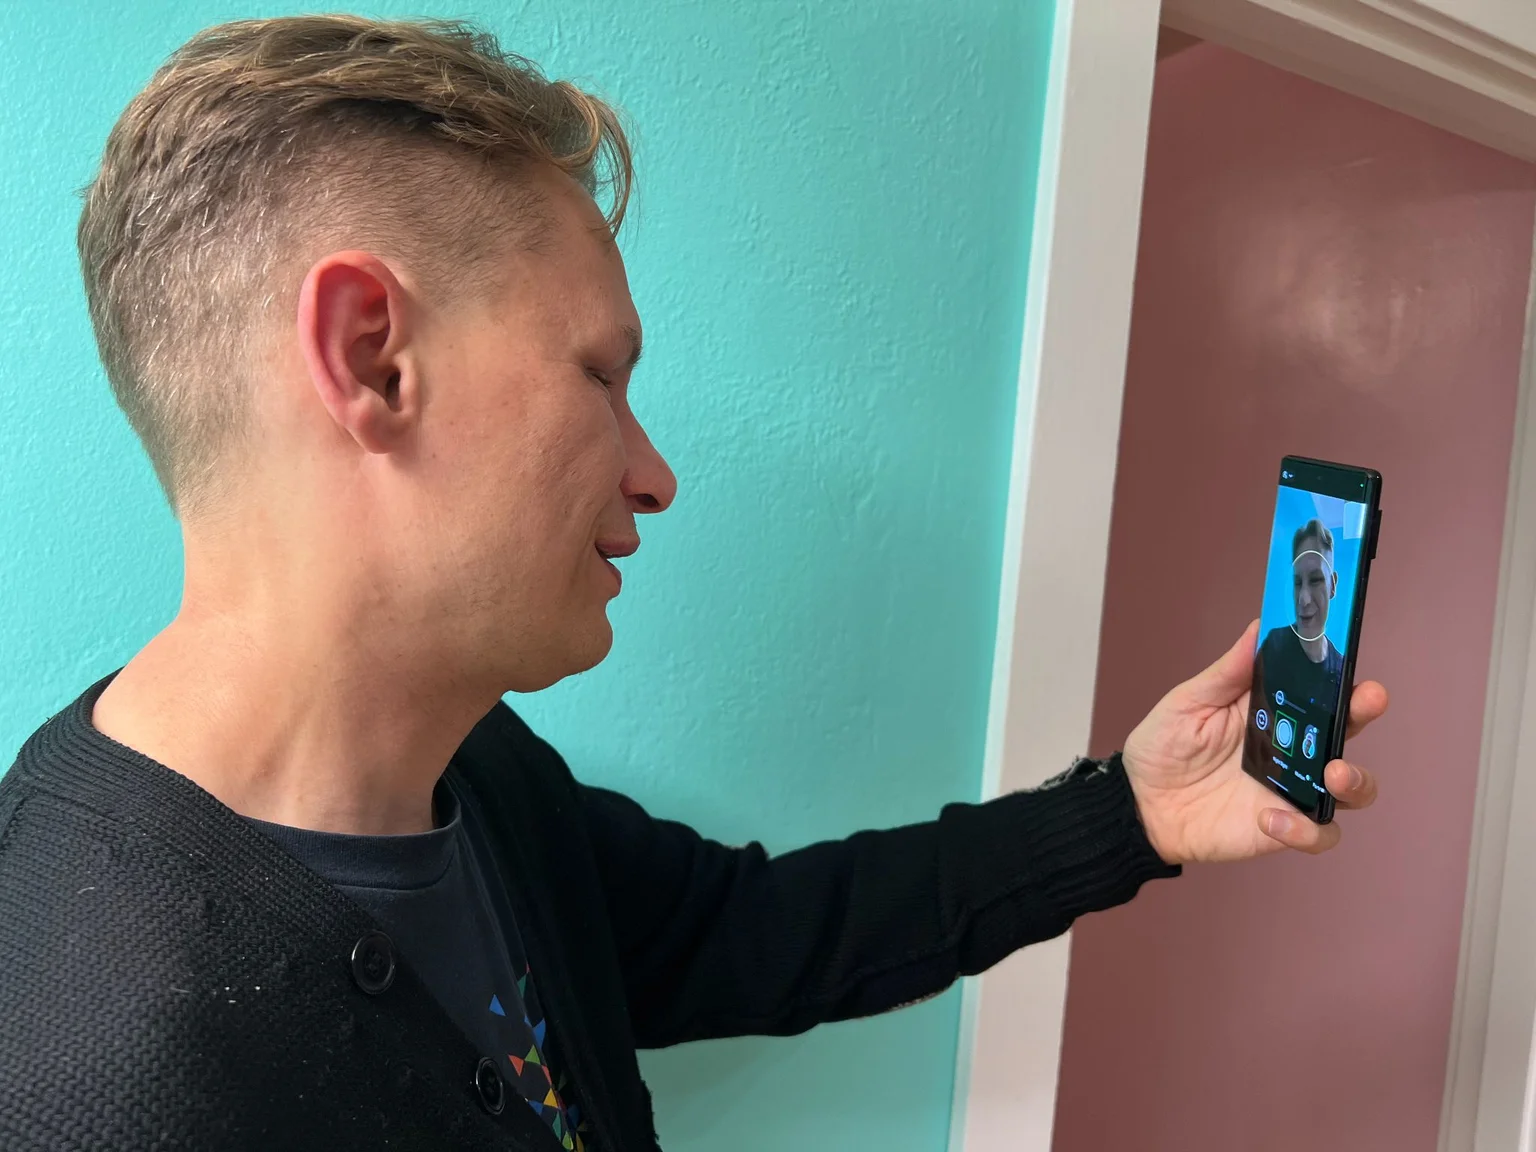 A photo of a man taken from a profile view. He is holding up his phone to take a selfie using Guided Frame.